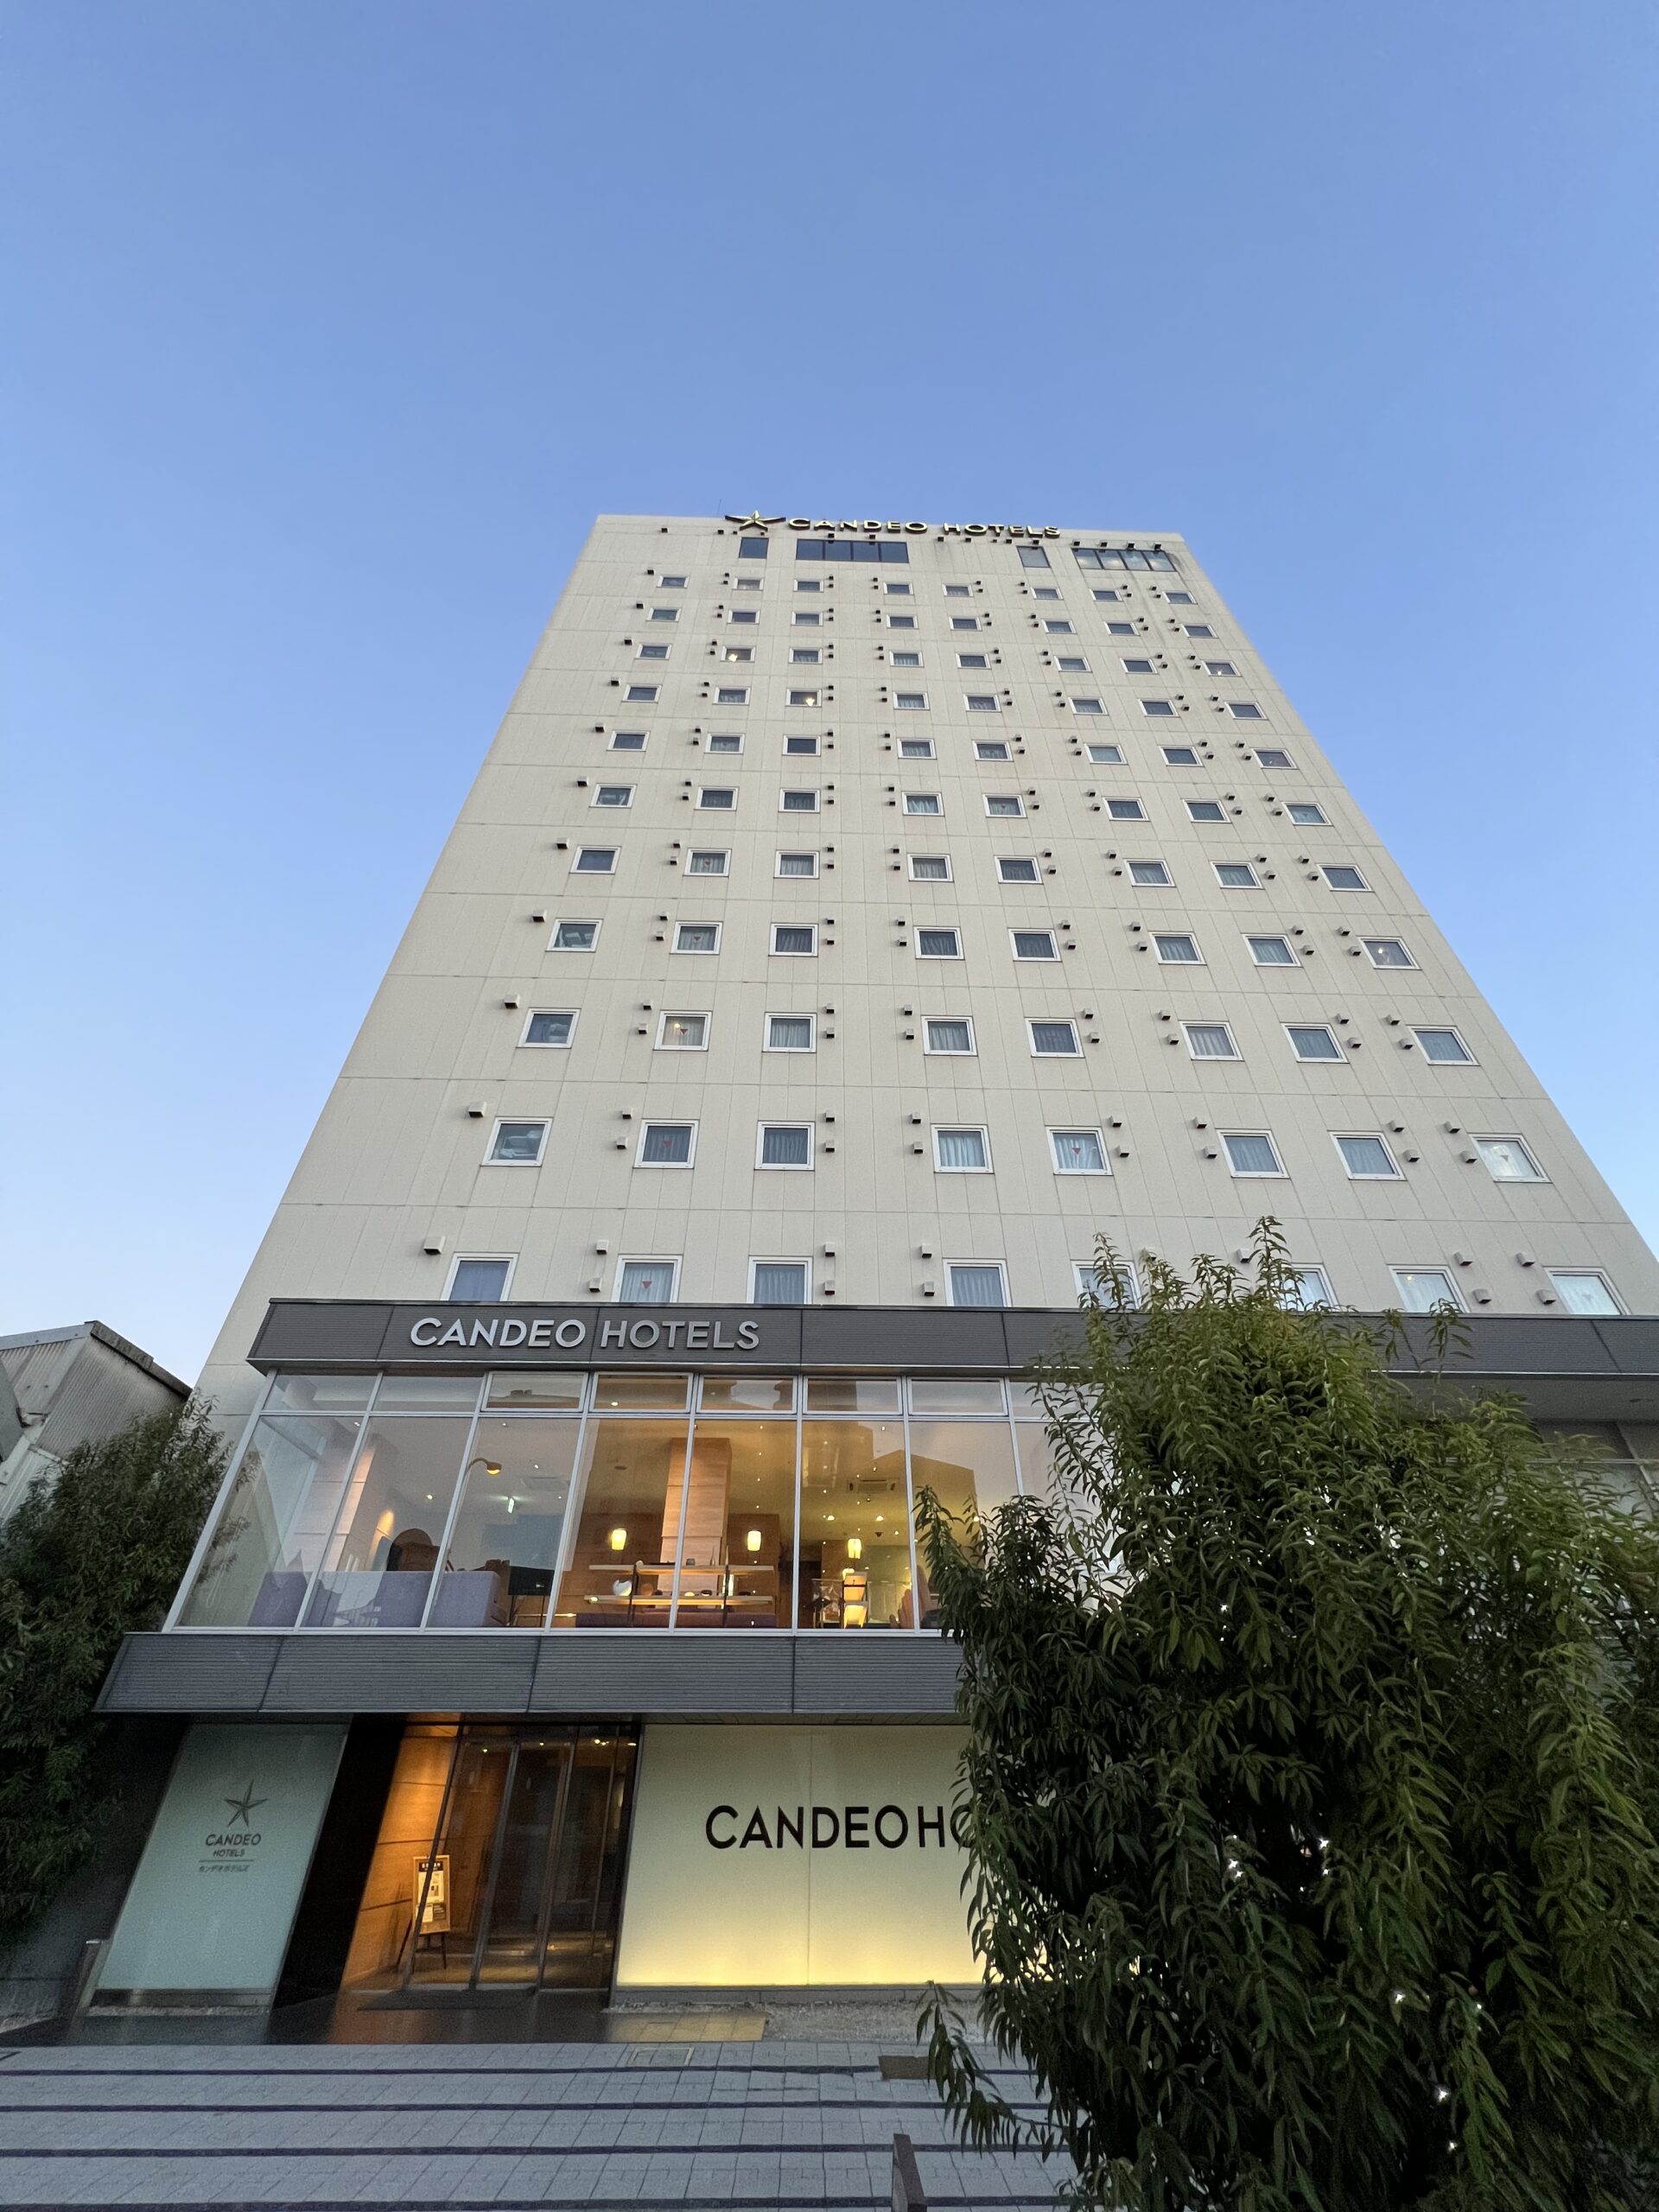 CANDEO HOTELS,福山